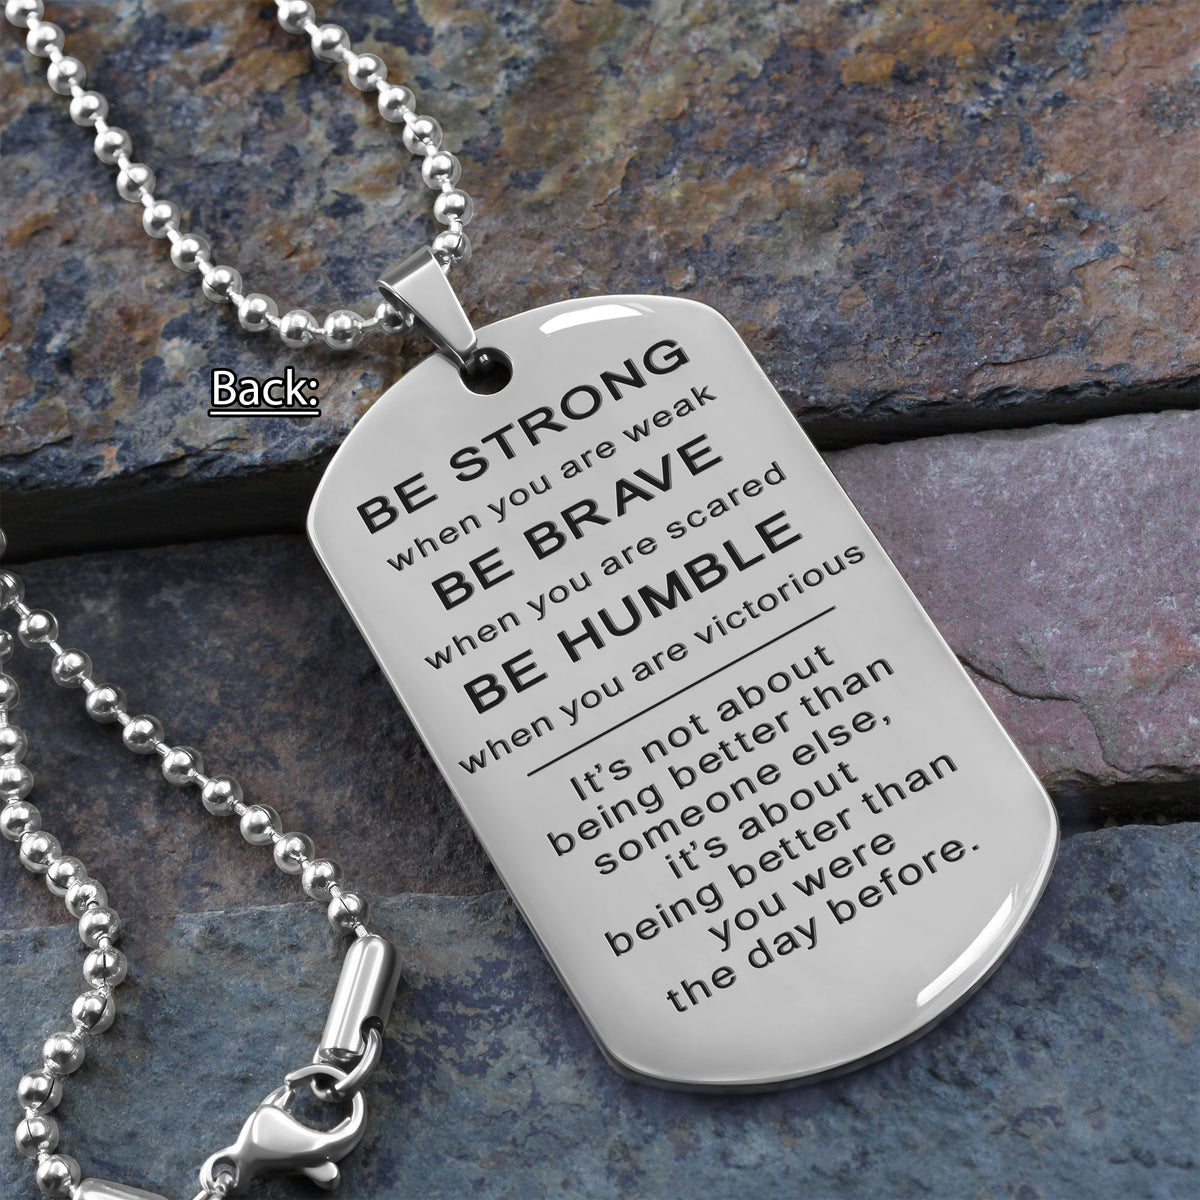 WAD050 - Call On Me Brother - It's Not About Being Better Than Someone Else - It's About Being Better Than You Were The Day Before - Warrior Dog Tag - Engrave Double Sliver Dog Tag